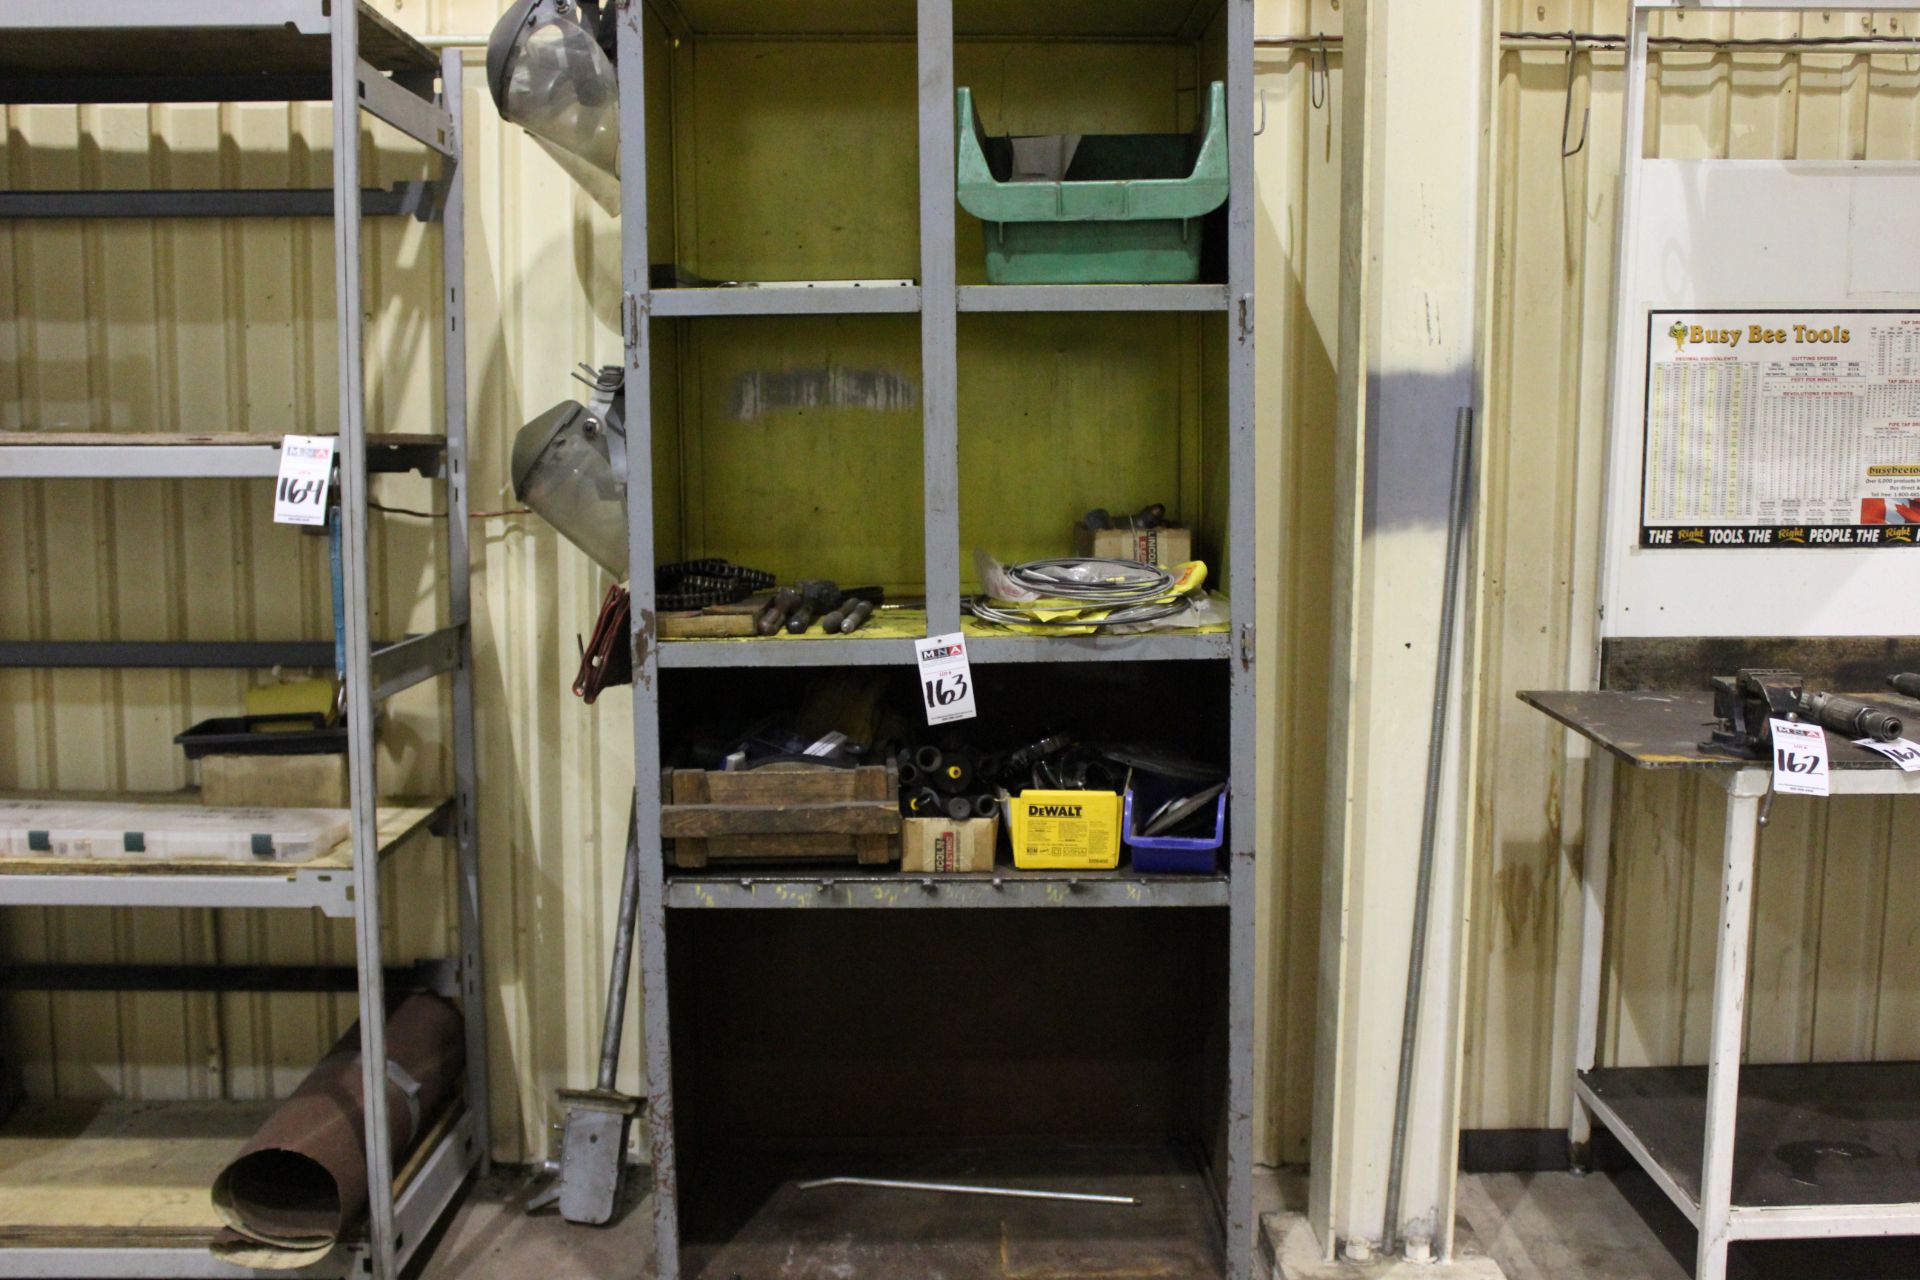 METAL SHELVING UNIT, ASSORTED GRINDER PARTS, DISCS, AND FACE SHIELDS